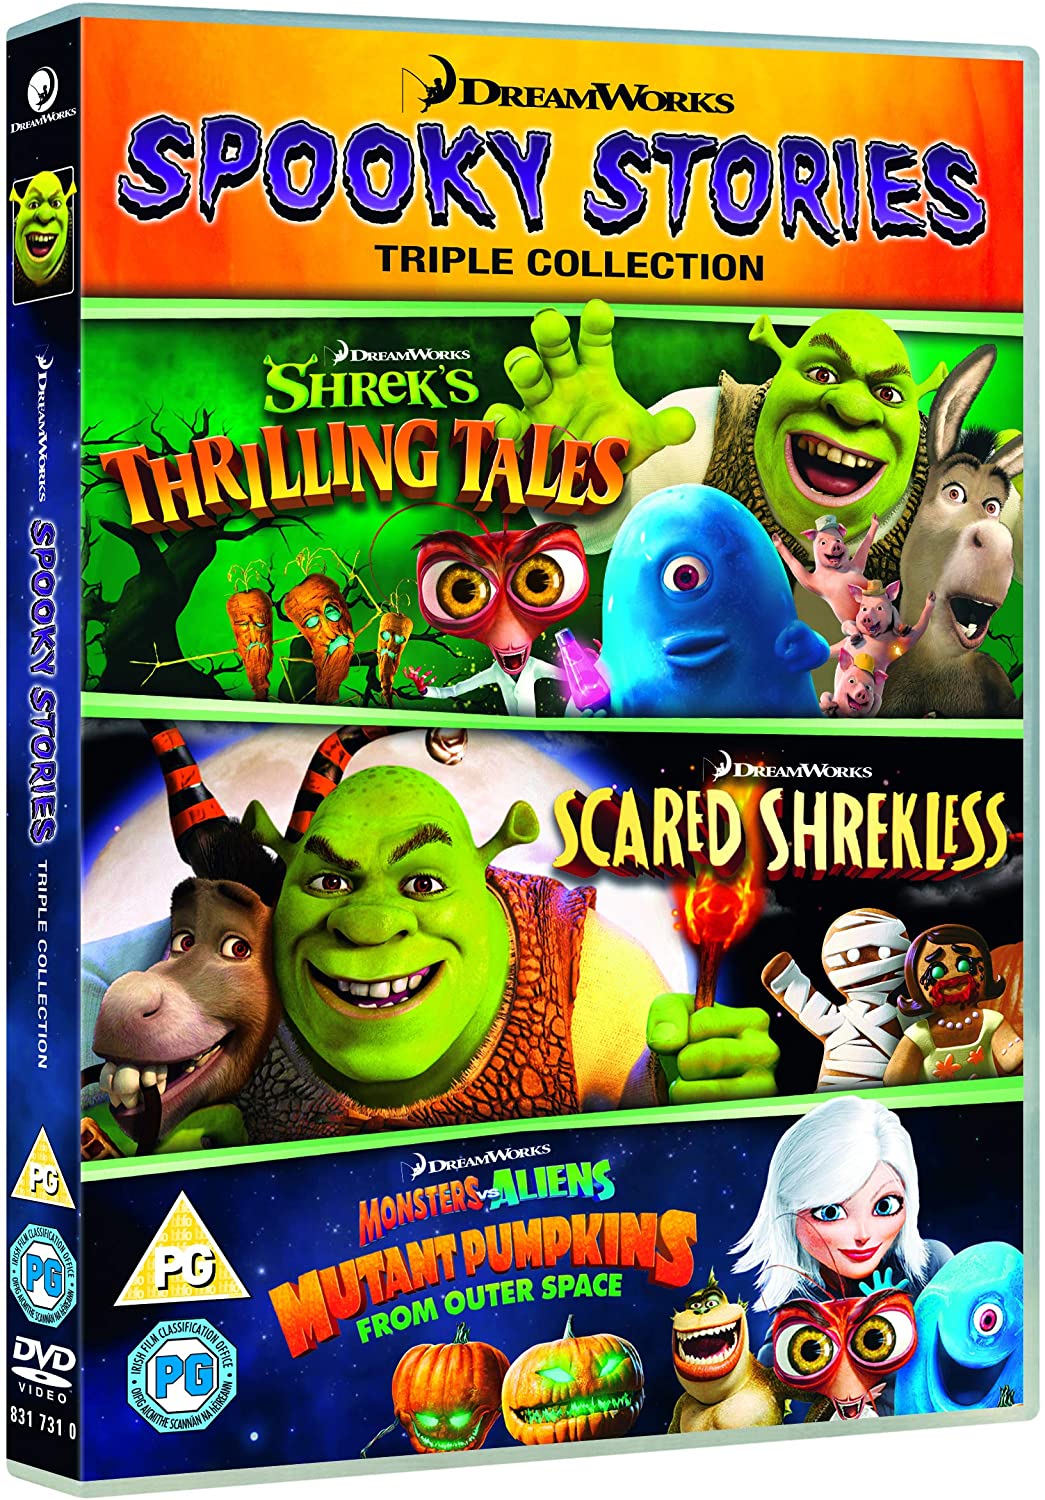 Dreamworks: Spooky Stories Collection (Dreamworks) (DVD)